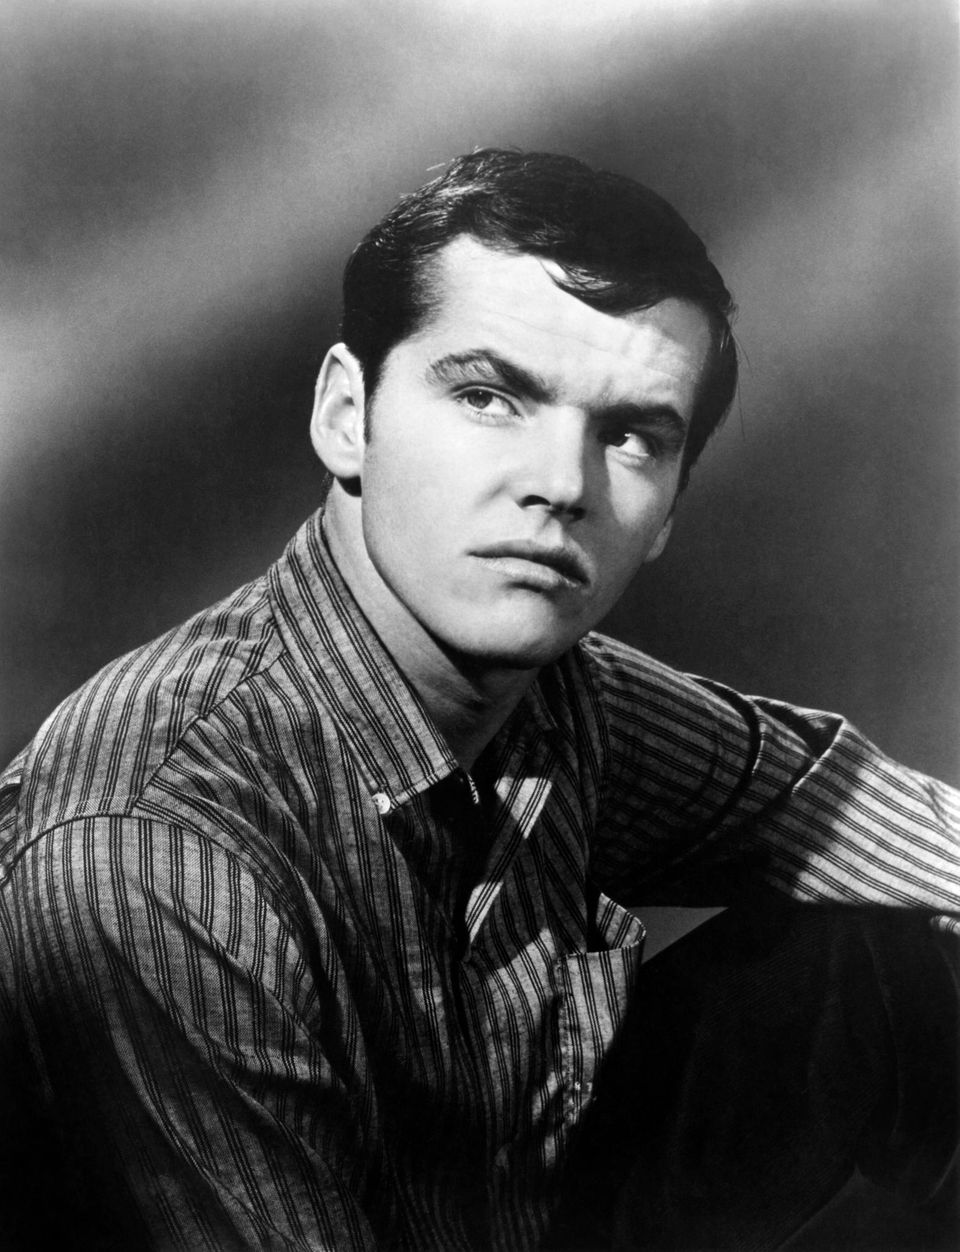 Jack Nicholson at the age of 20